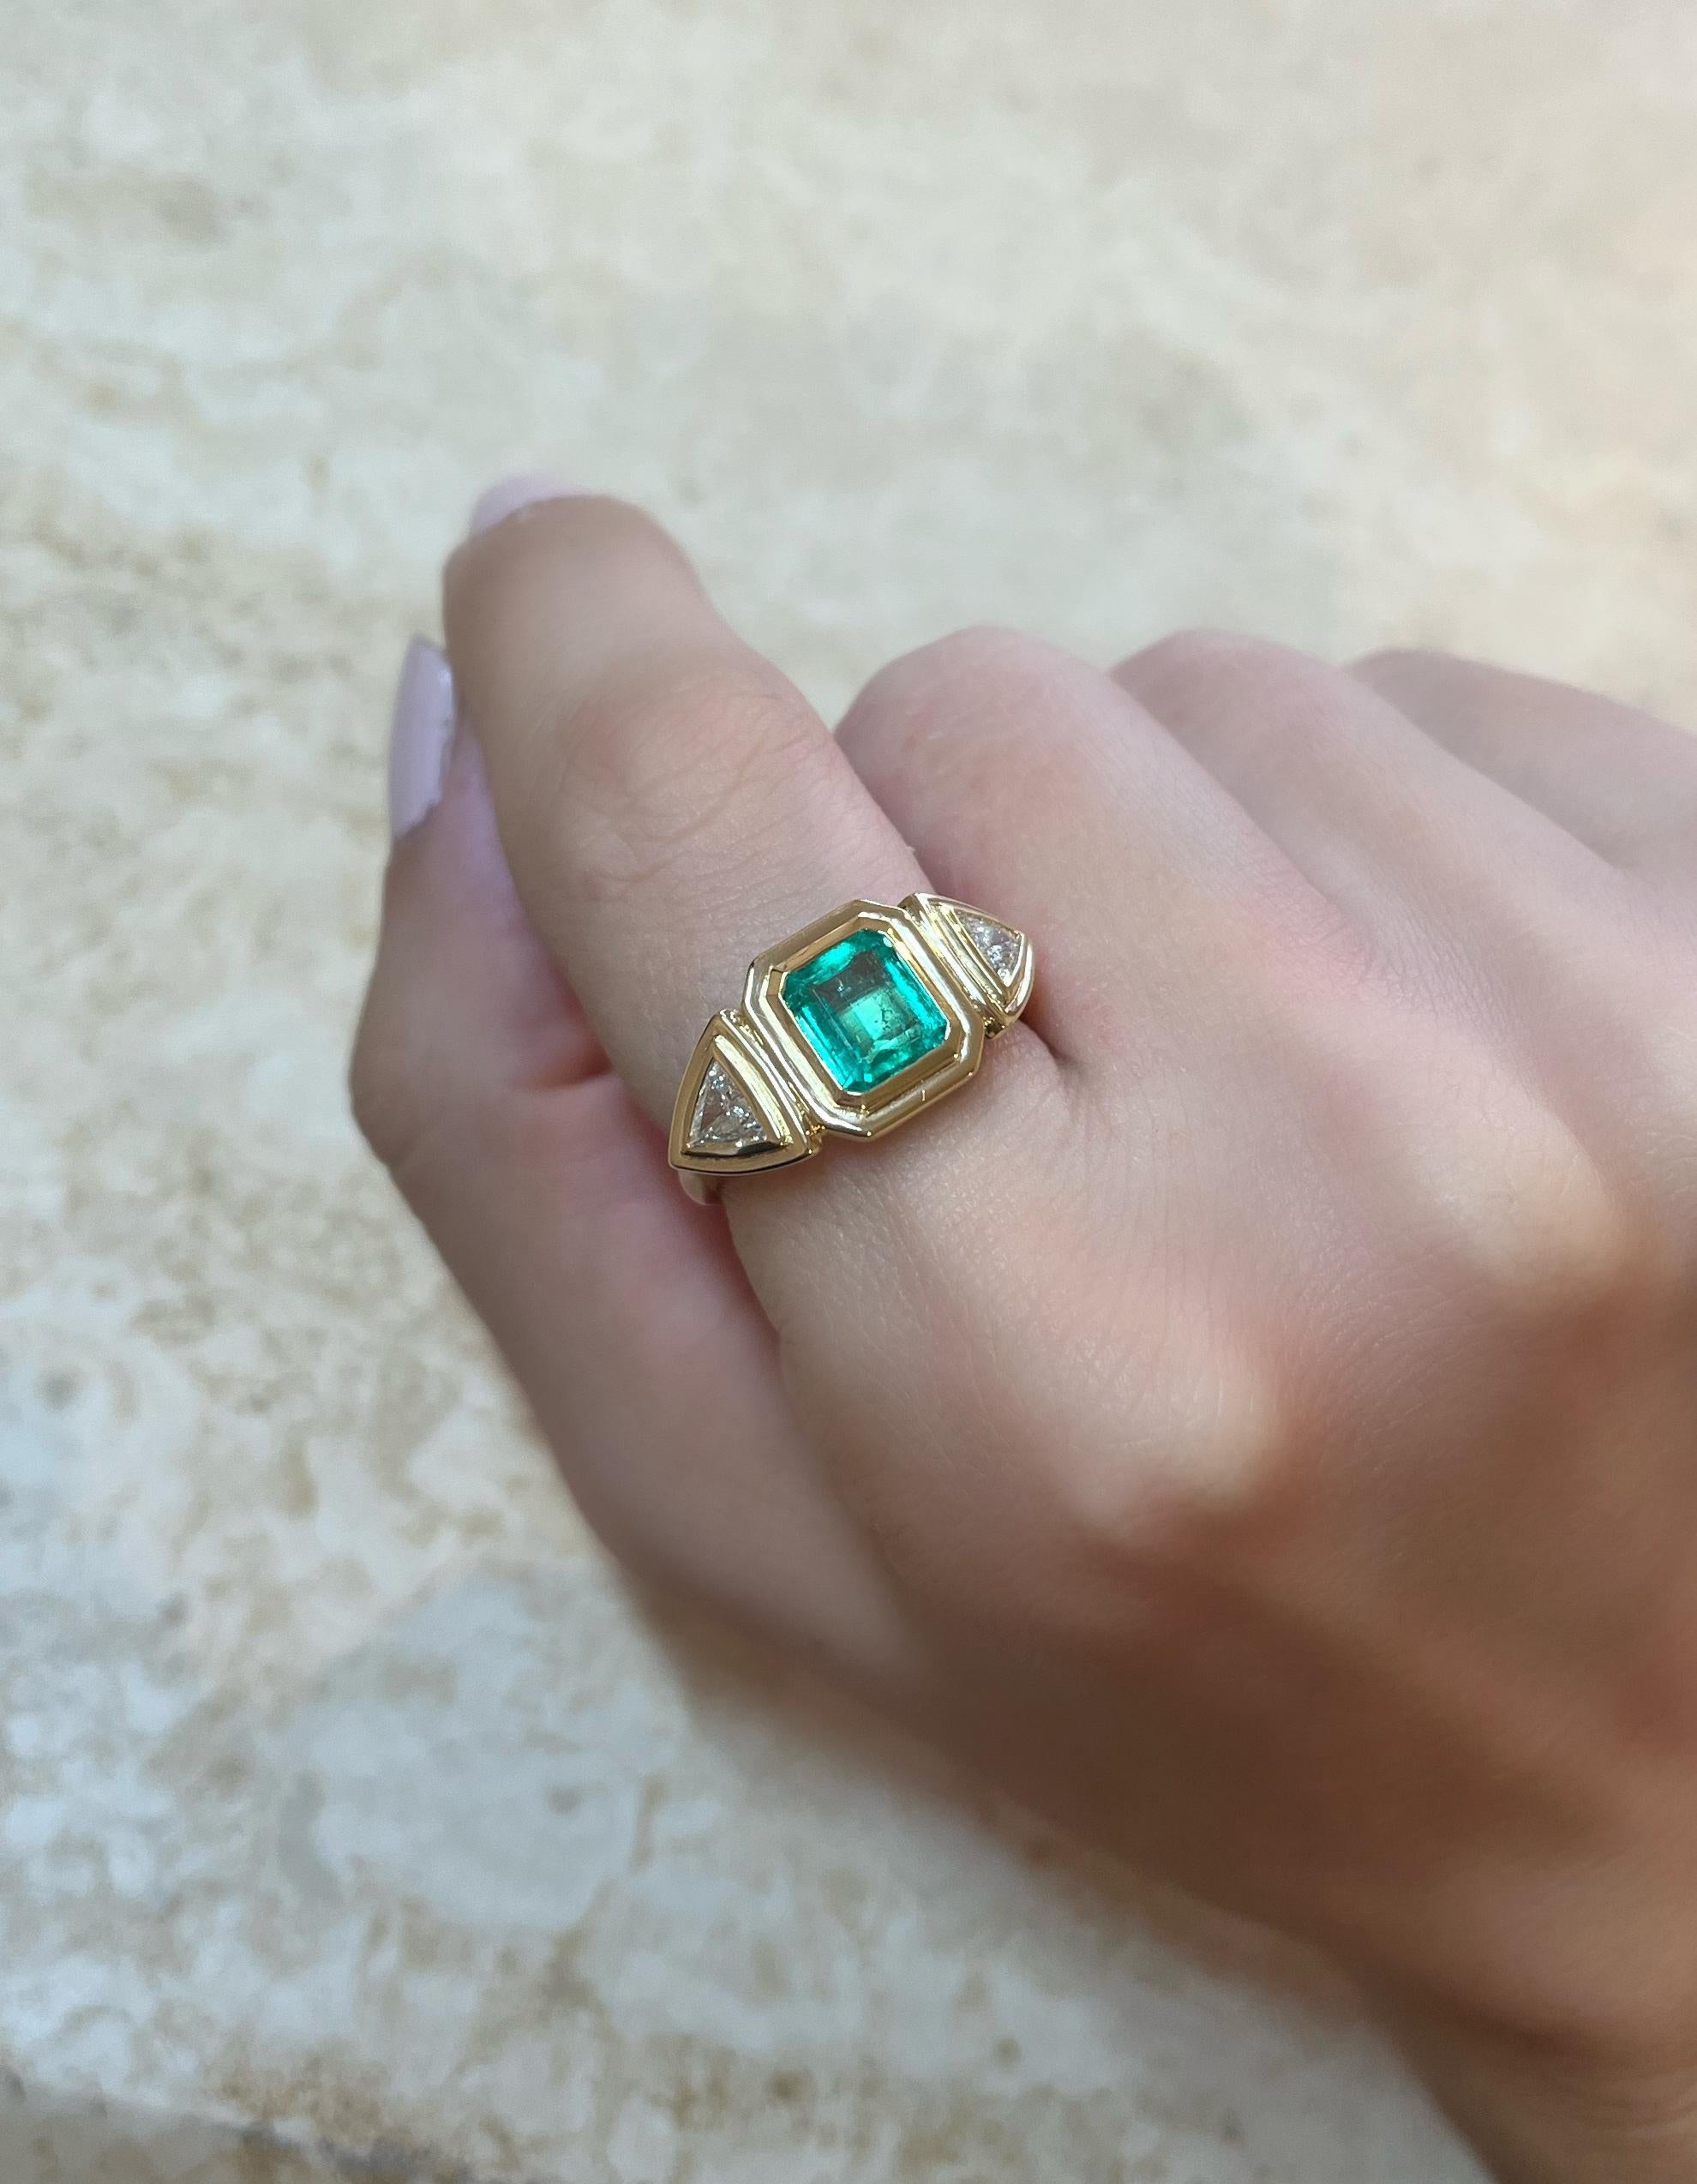 This exquisite 18-karat gold ring is centered with a natural emerald and paired with two natural trillion-cut diamonds, in a geometric stepped setting. 

The ring weighs just over 6 grams of gold, giving it a luxurious feel. It's three stone design